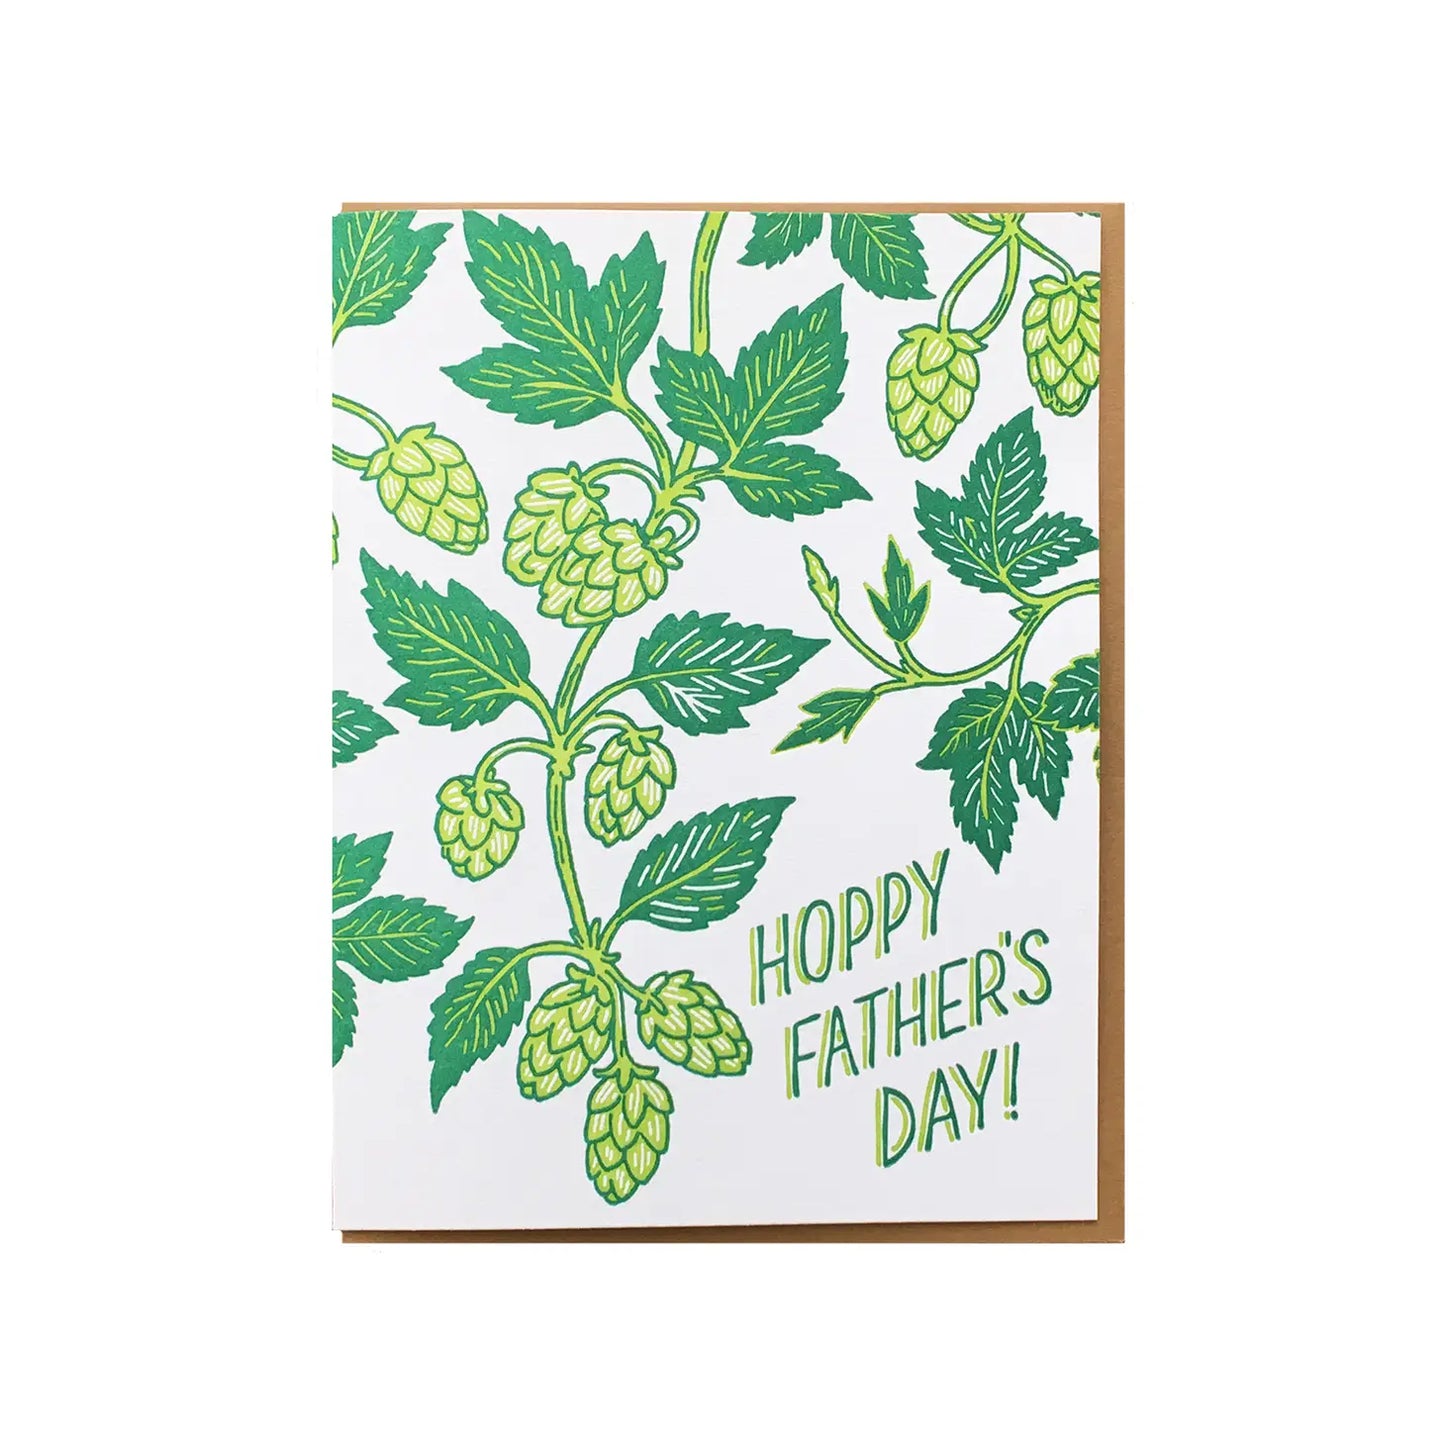 Hoppy Father's Day Greeting Card